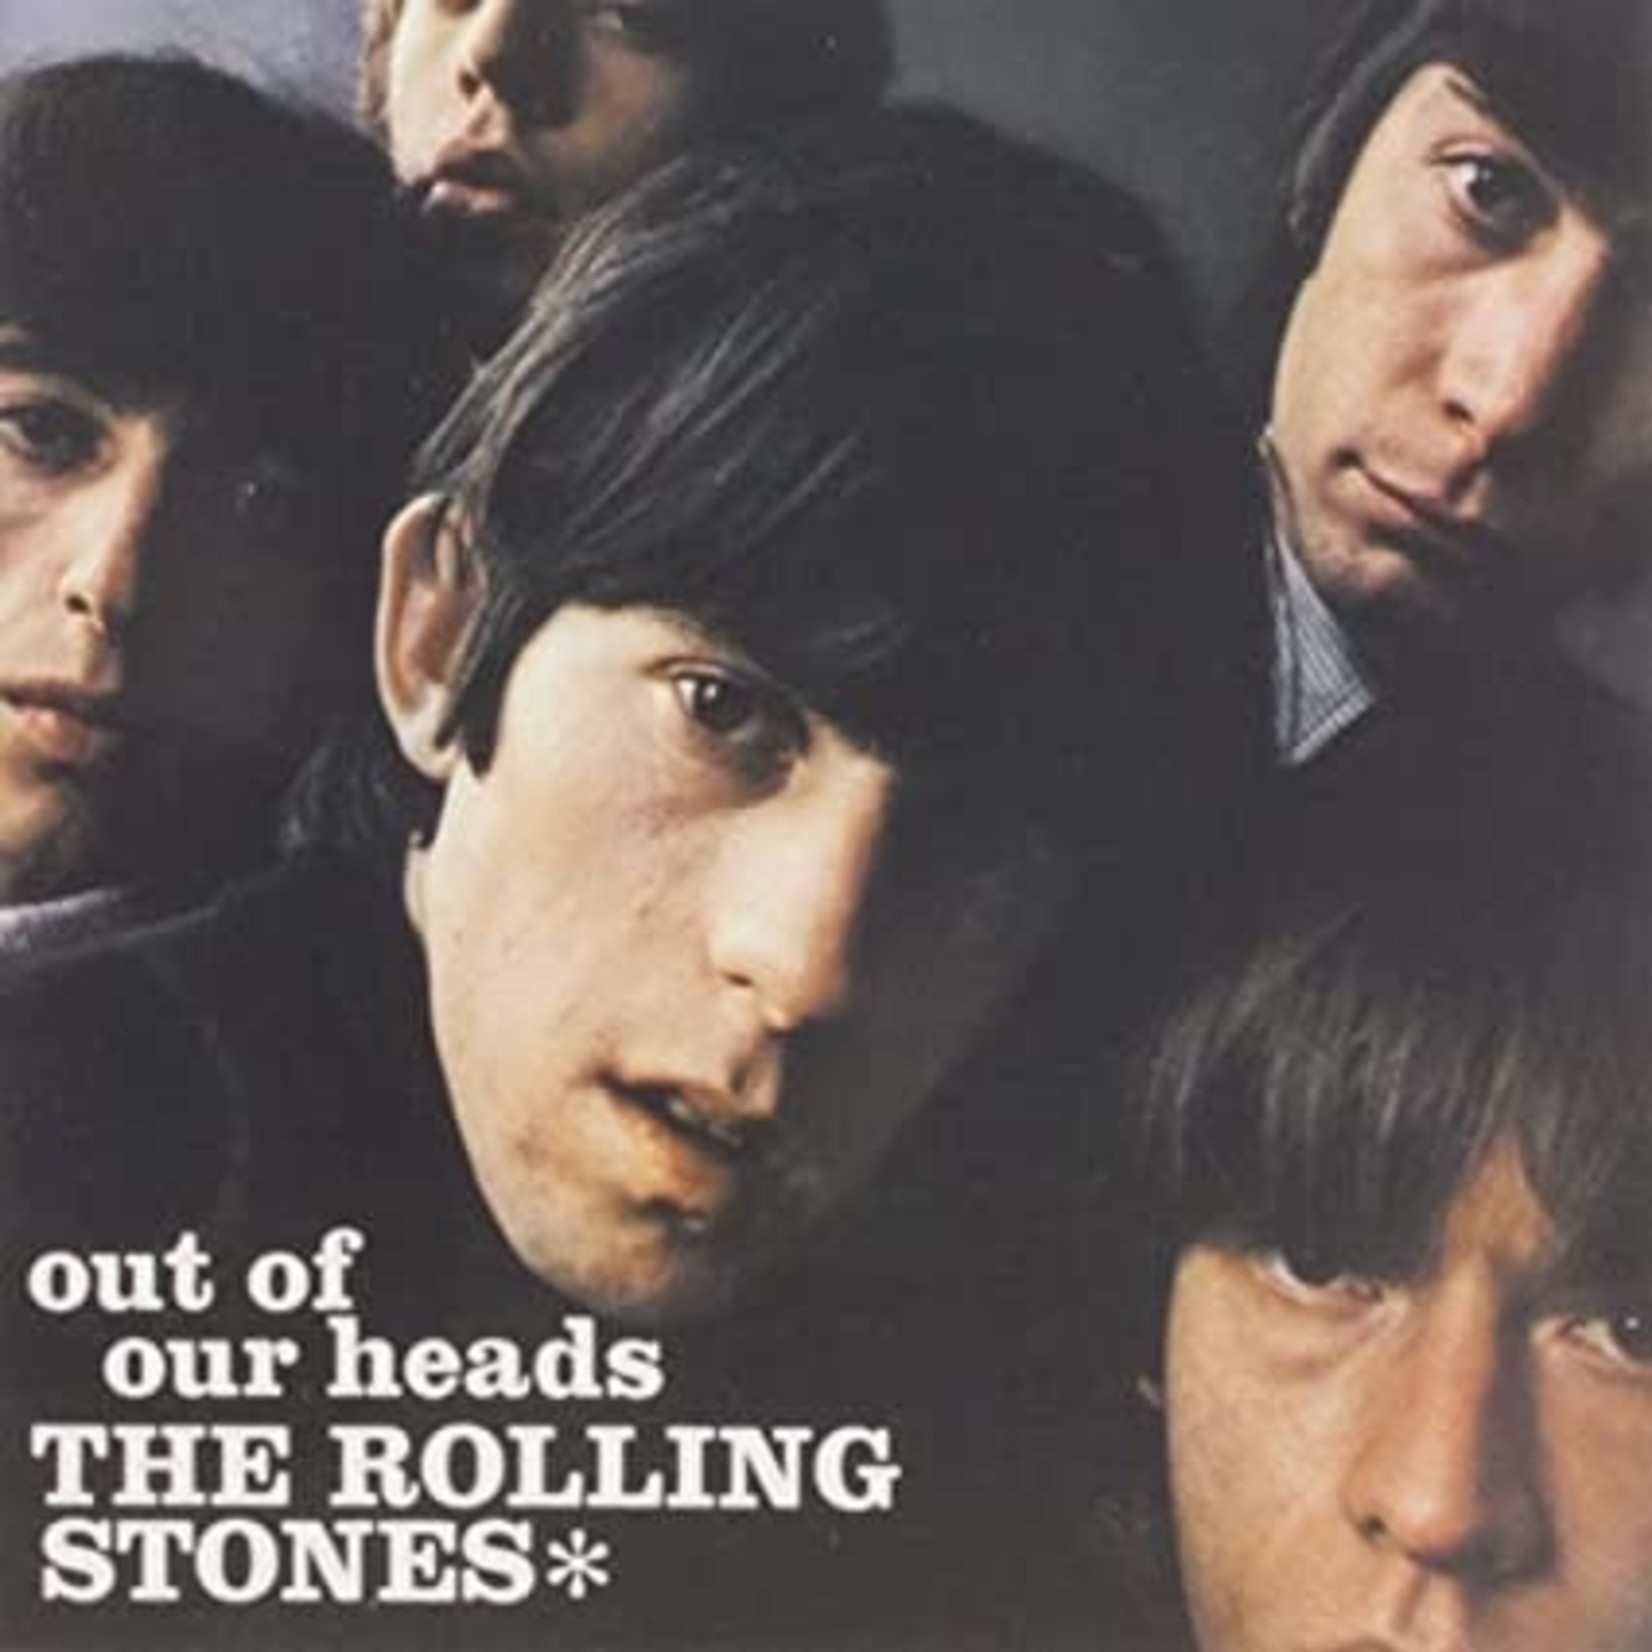 [Vintage] Rolling Stones - Out of Our Heads (reissue)